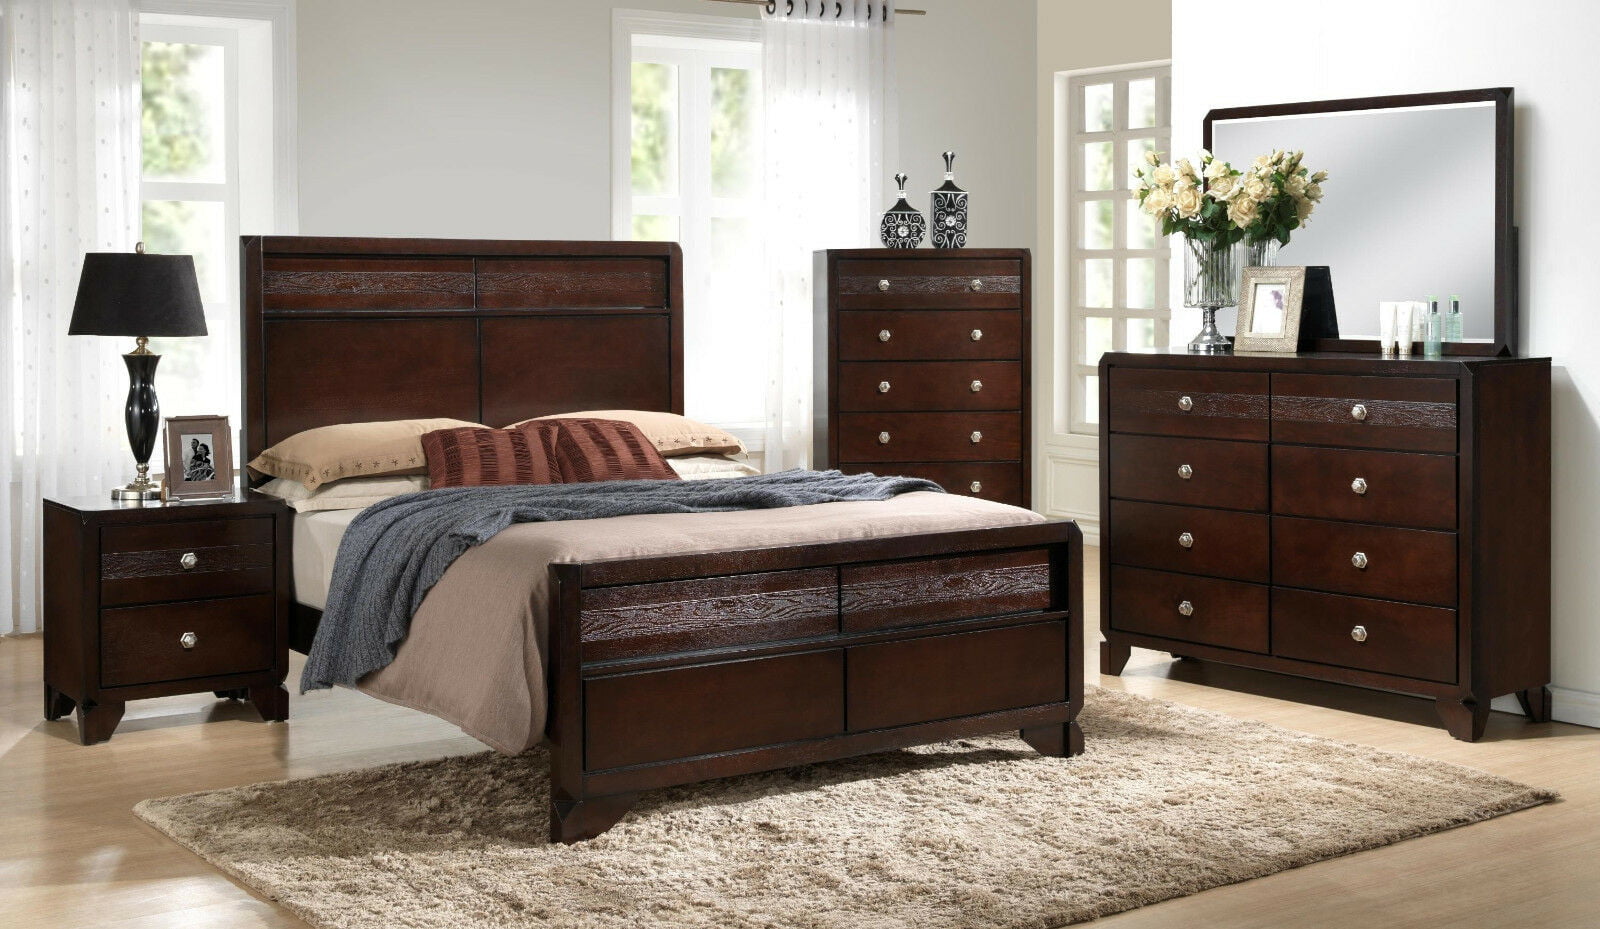 Transitional Style 4pc Chocolate Wood, Dark Brown Dresser And Nightstand